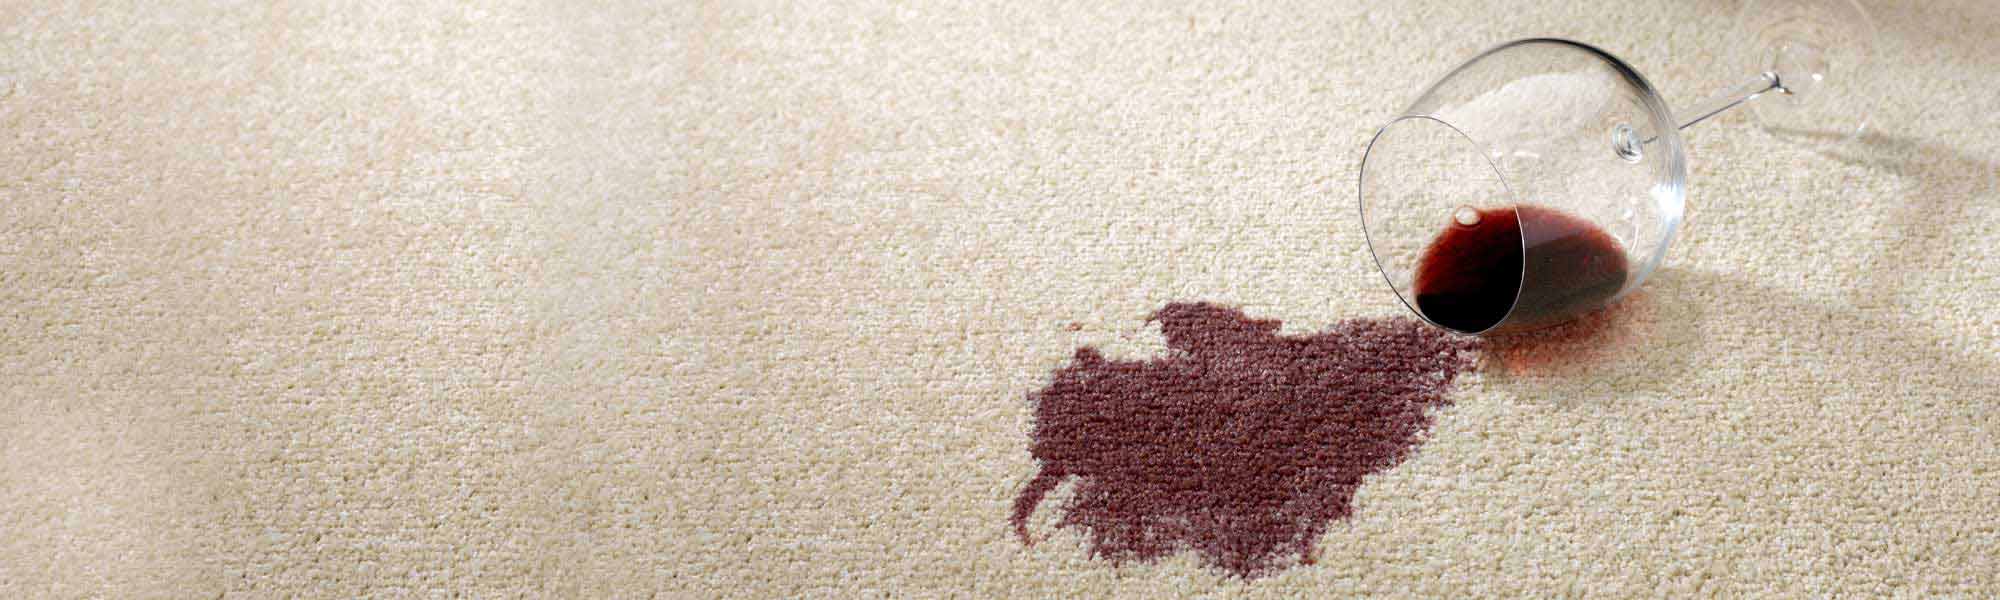 Specialty Stain Removal Service by Chem-Dry of the Southwest in Durango